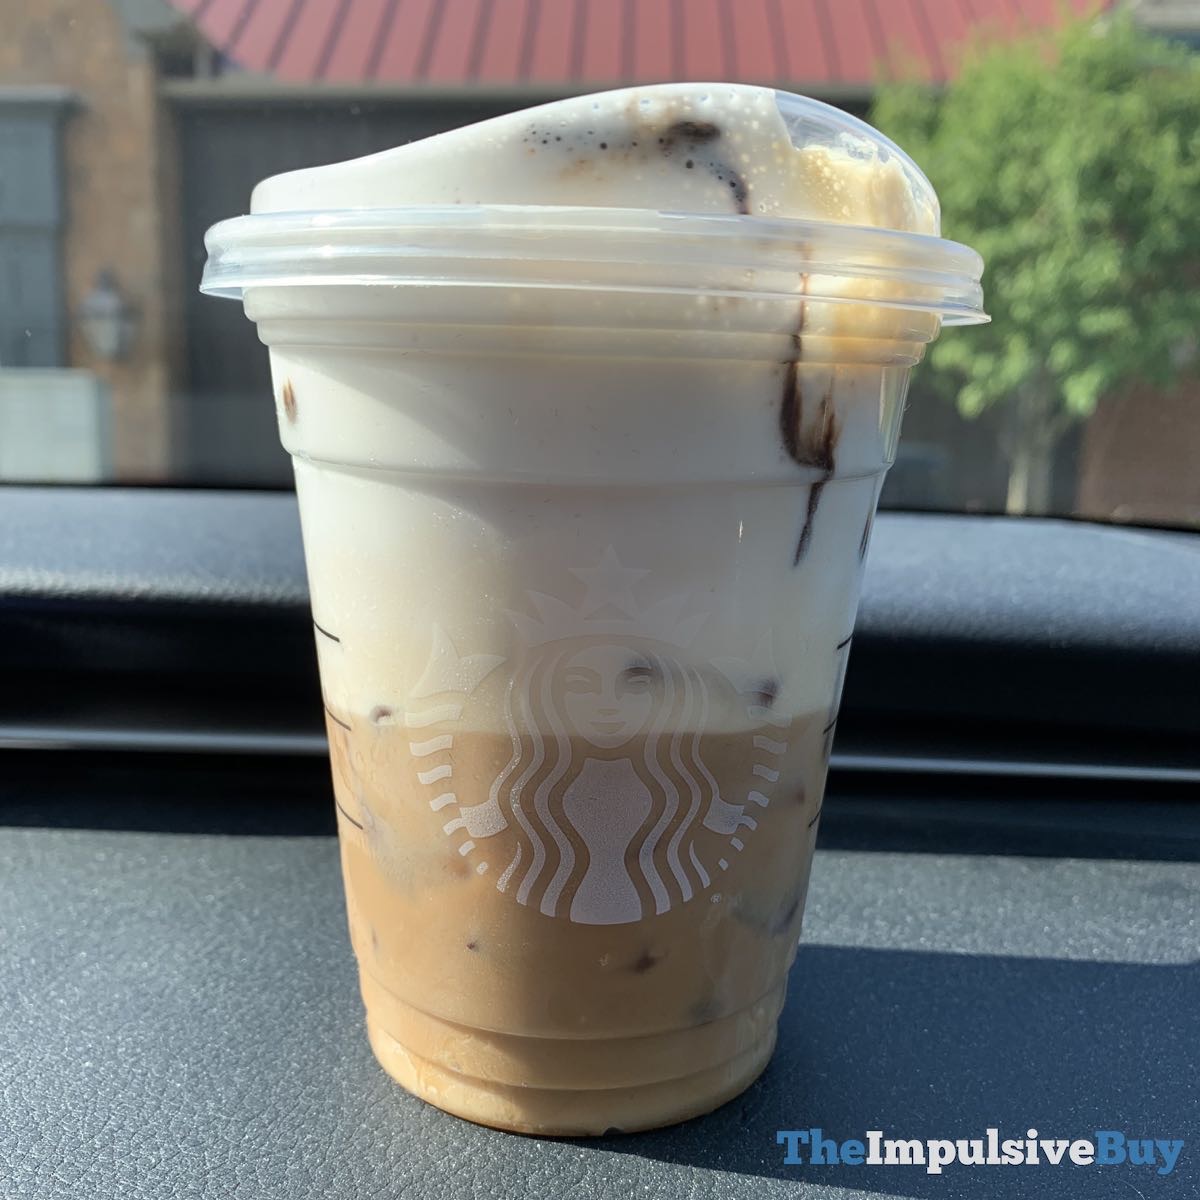 Review Starbucks Iced Cocoa Cloud Macchiato The Impulsive Buy,Best Ceiling Fans For Home